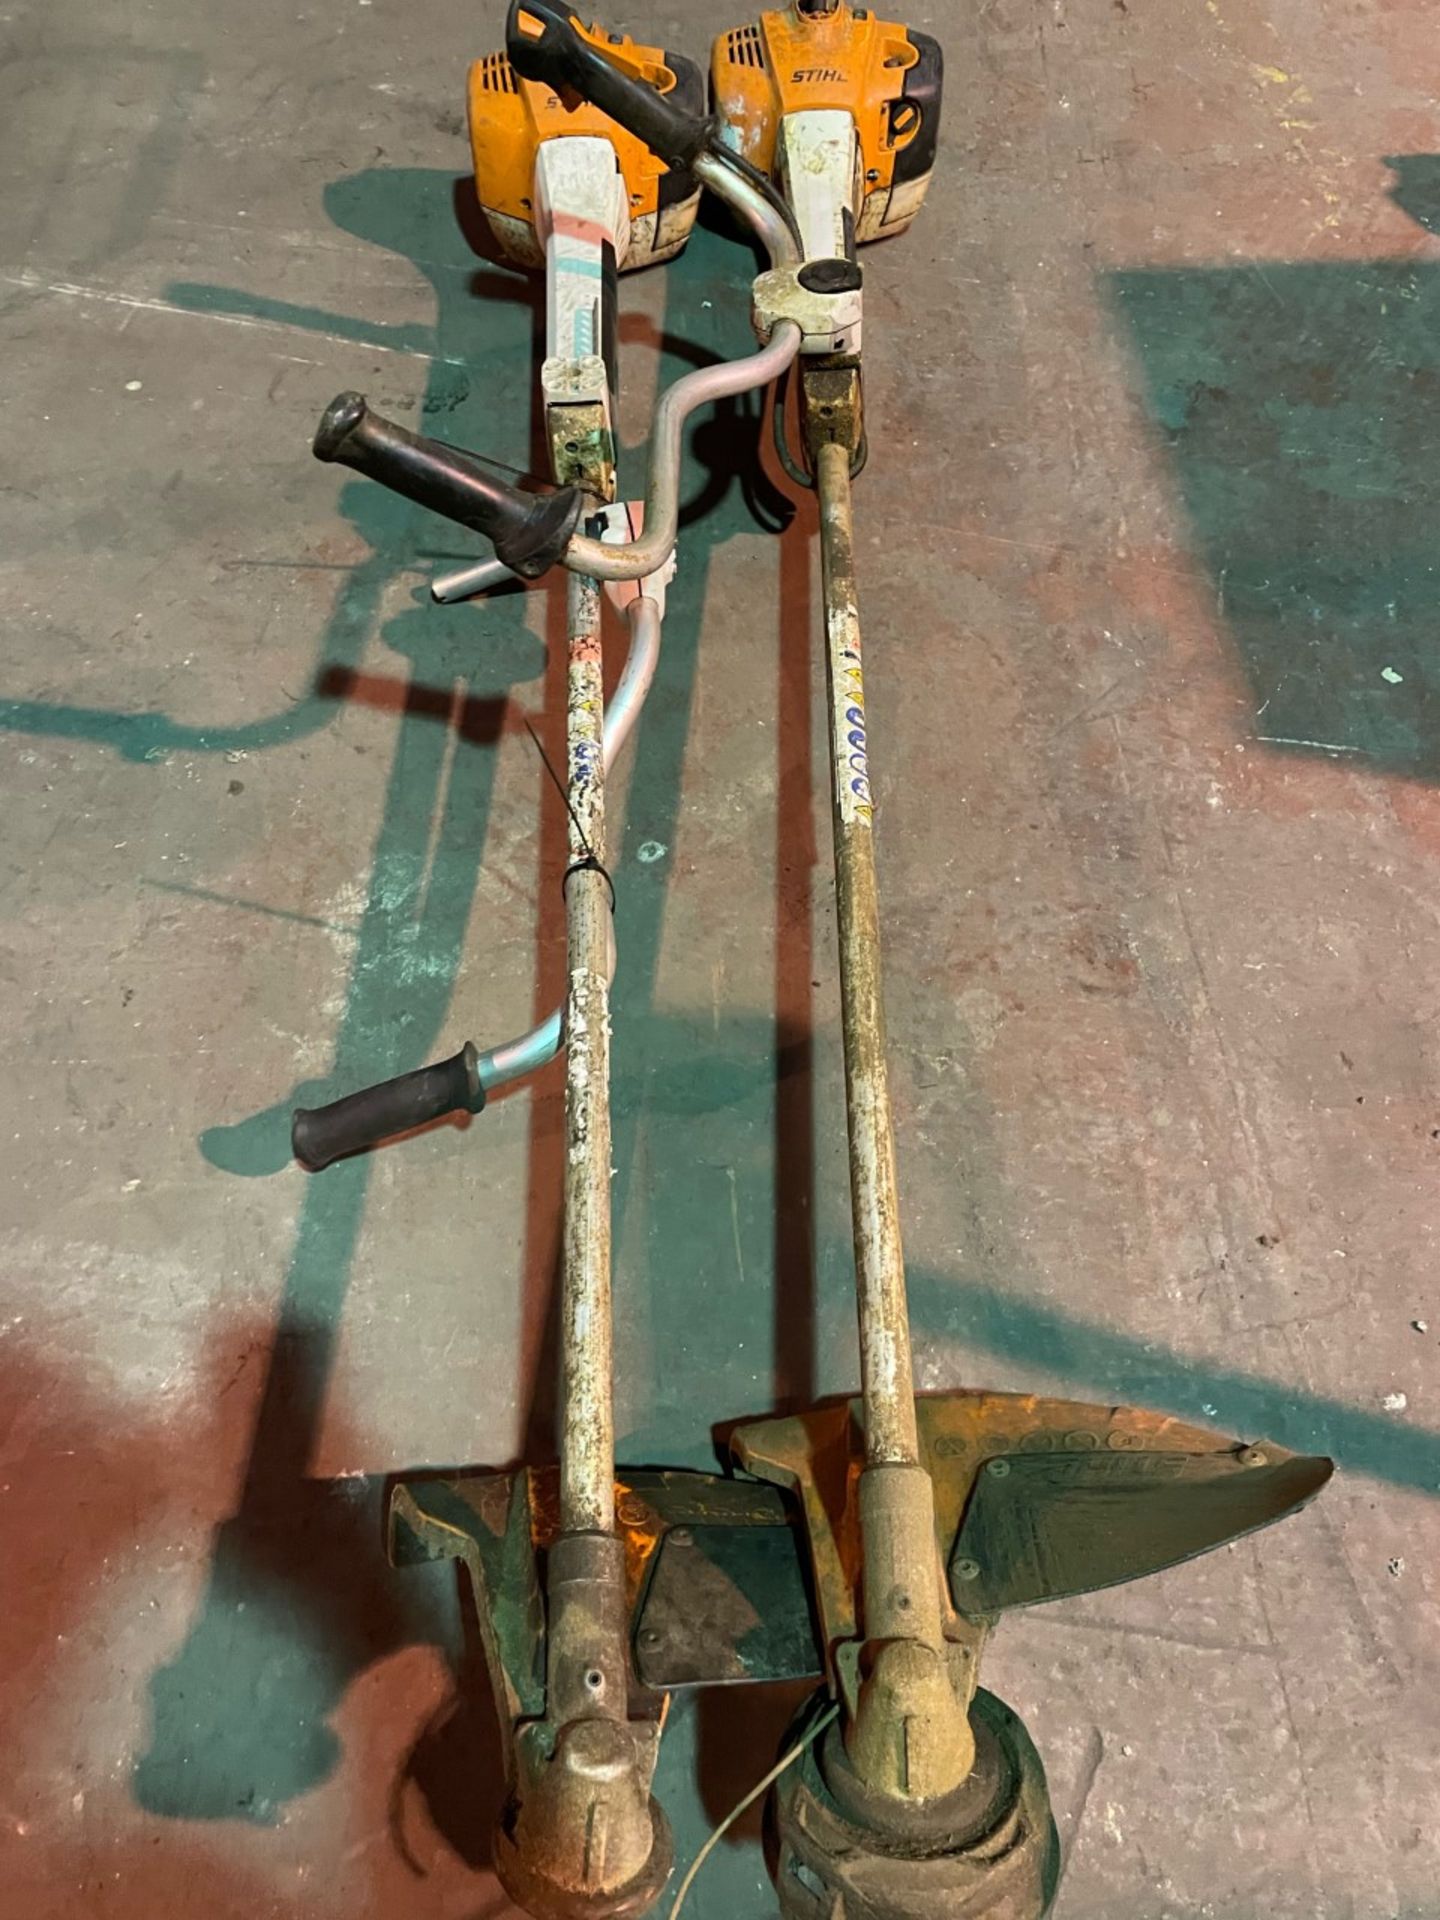 2x Stihl fs450 strimmers spares or repair - Image 2 of 2